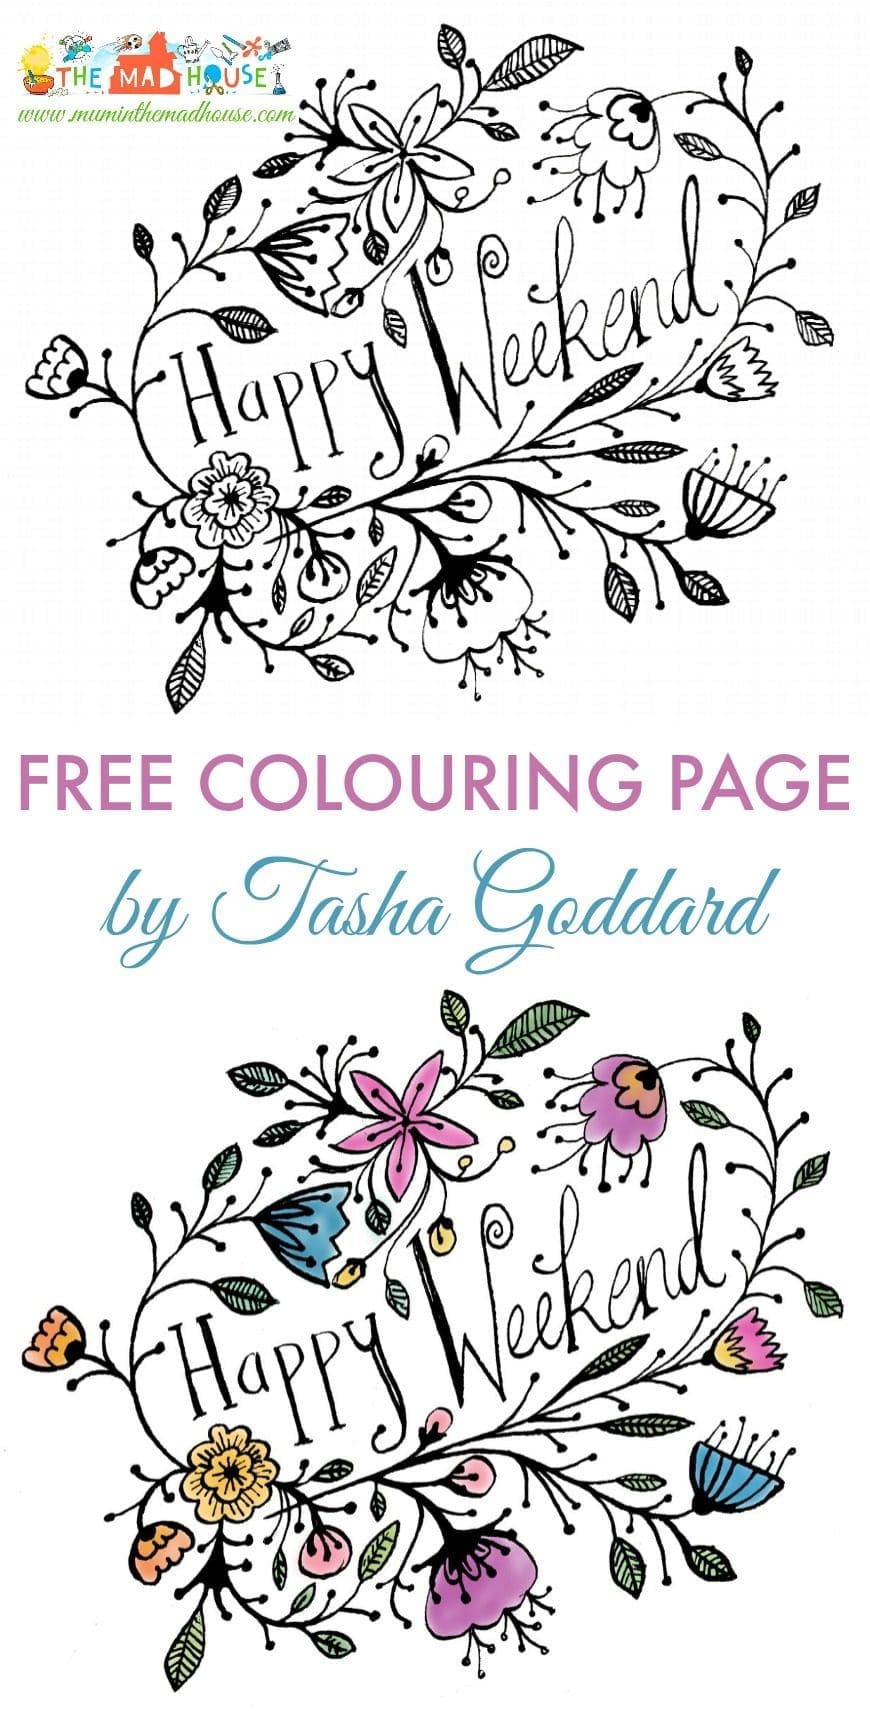 Free Happy Weekend Colouring Page - celebrate the weekend with this beautiful adult colouring page by Tasha Goddard for Mum in the Mad House. A stunning free printable adult colouring page perfect for celebrating the weekend.